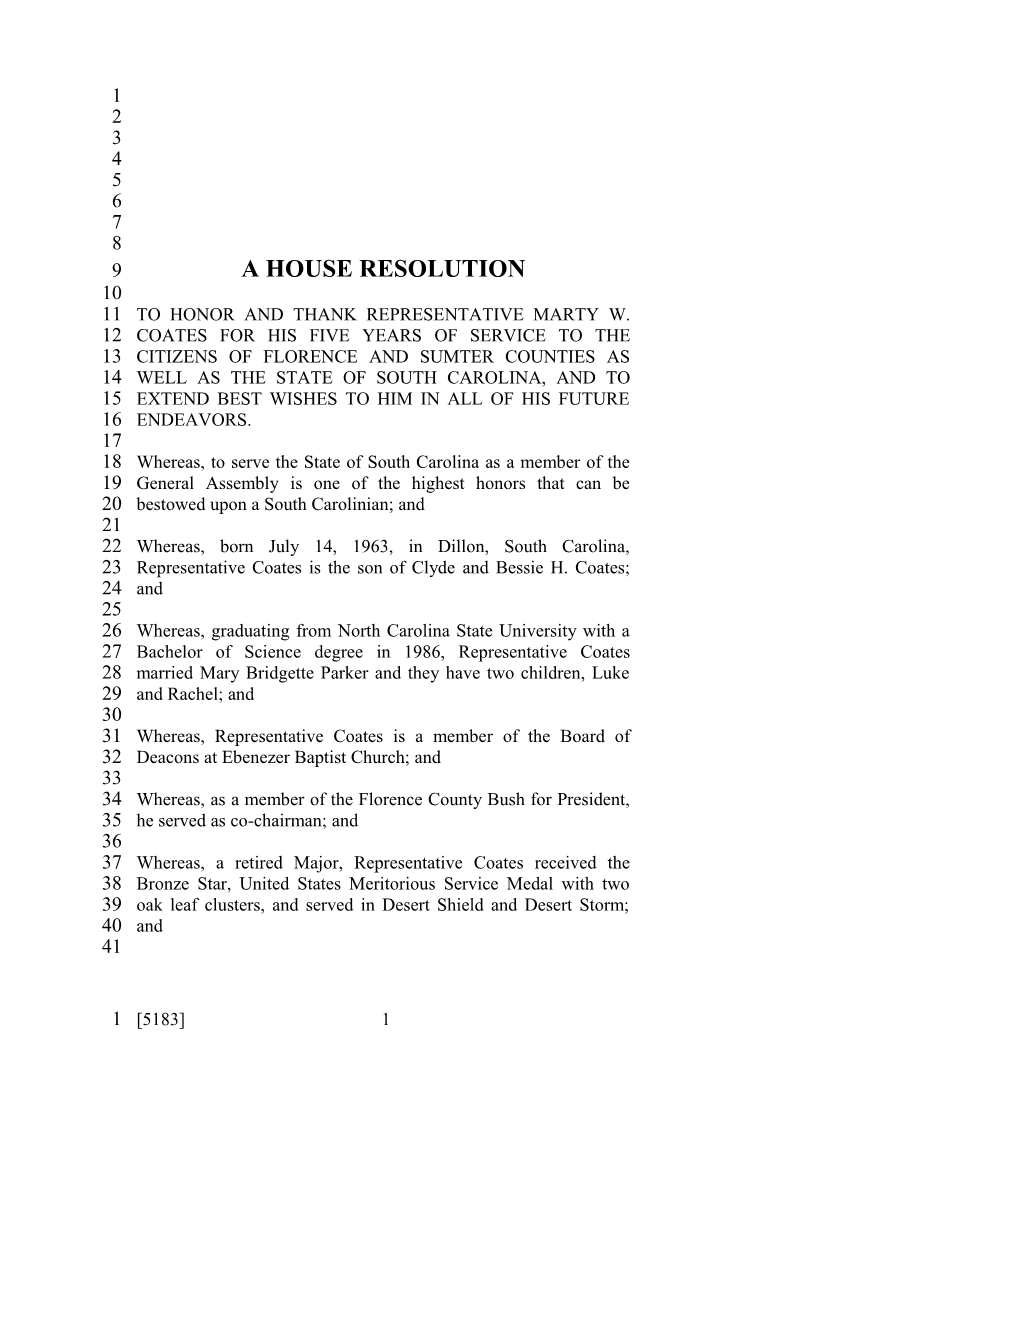 A House Resolution s19